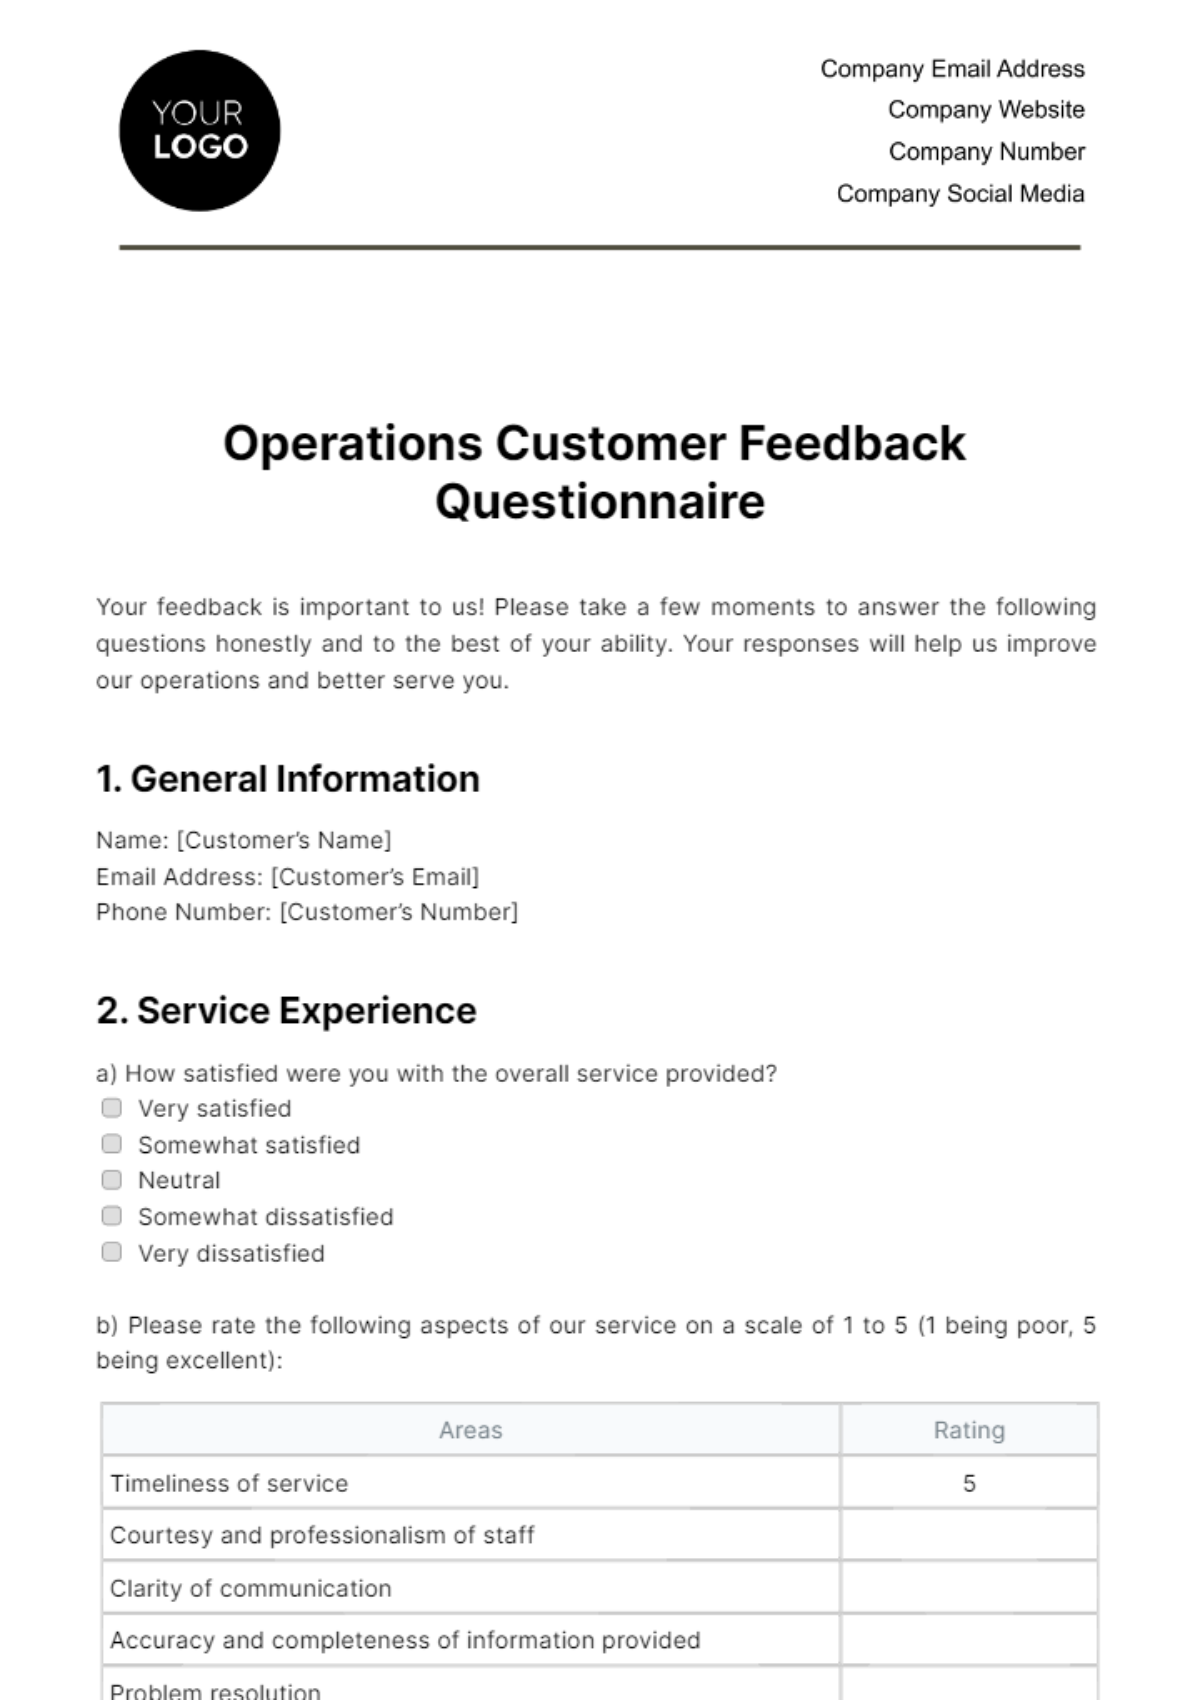 Operations Customer Feedback Questionnaire Template